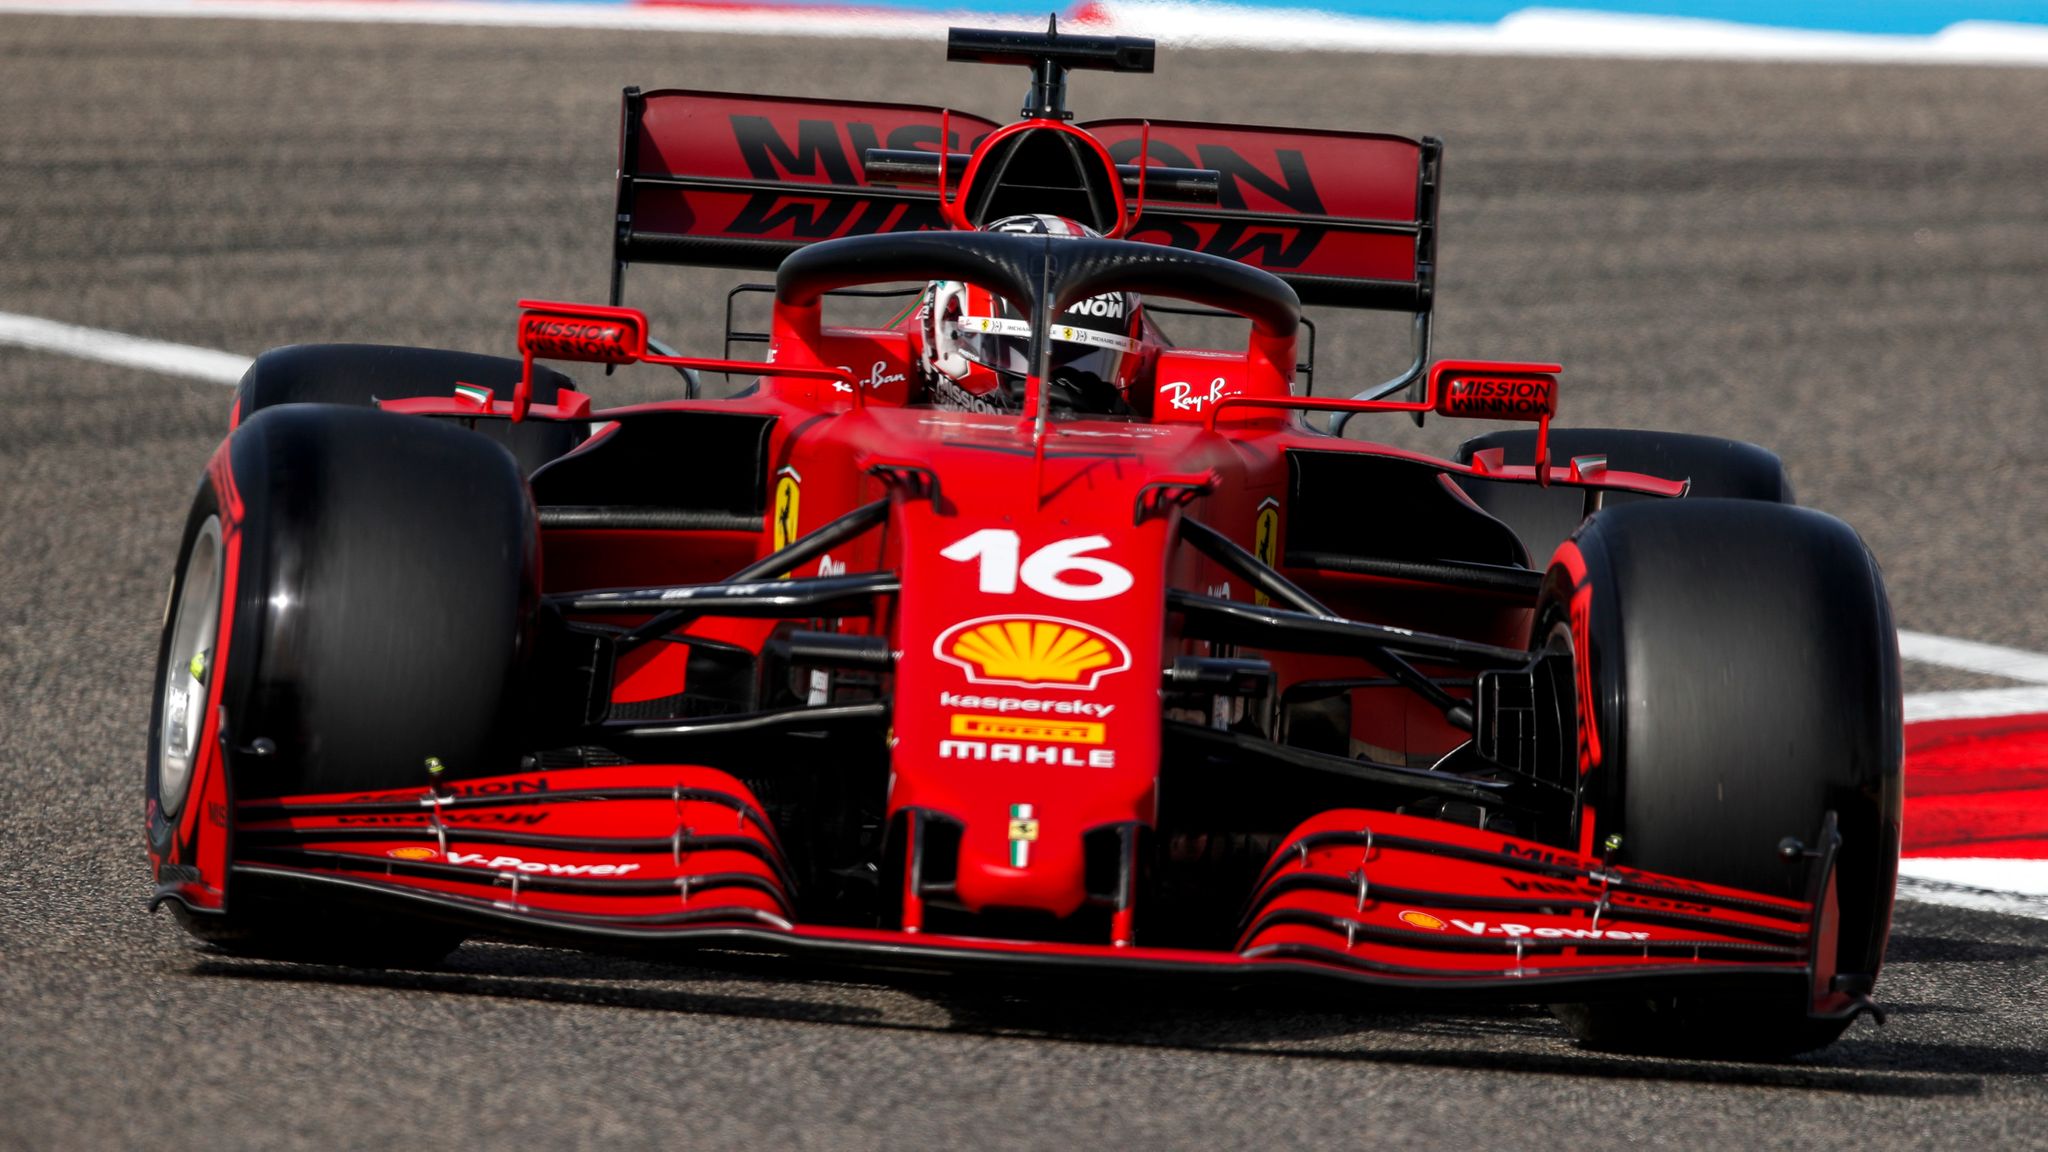 Ferrari have made 'significant step forward' in says Charles Leclerc as F1 comeback begins